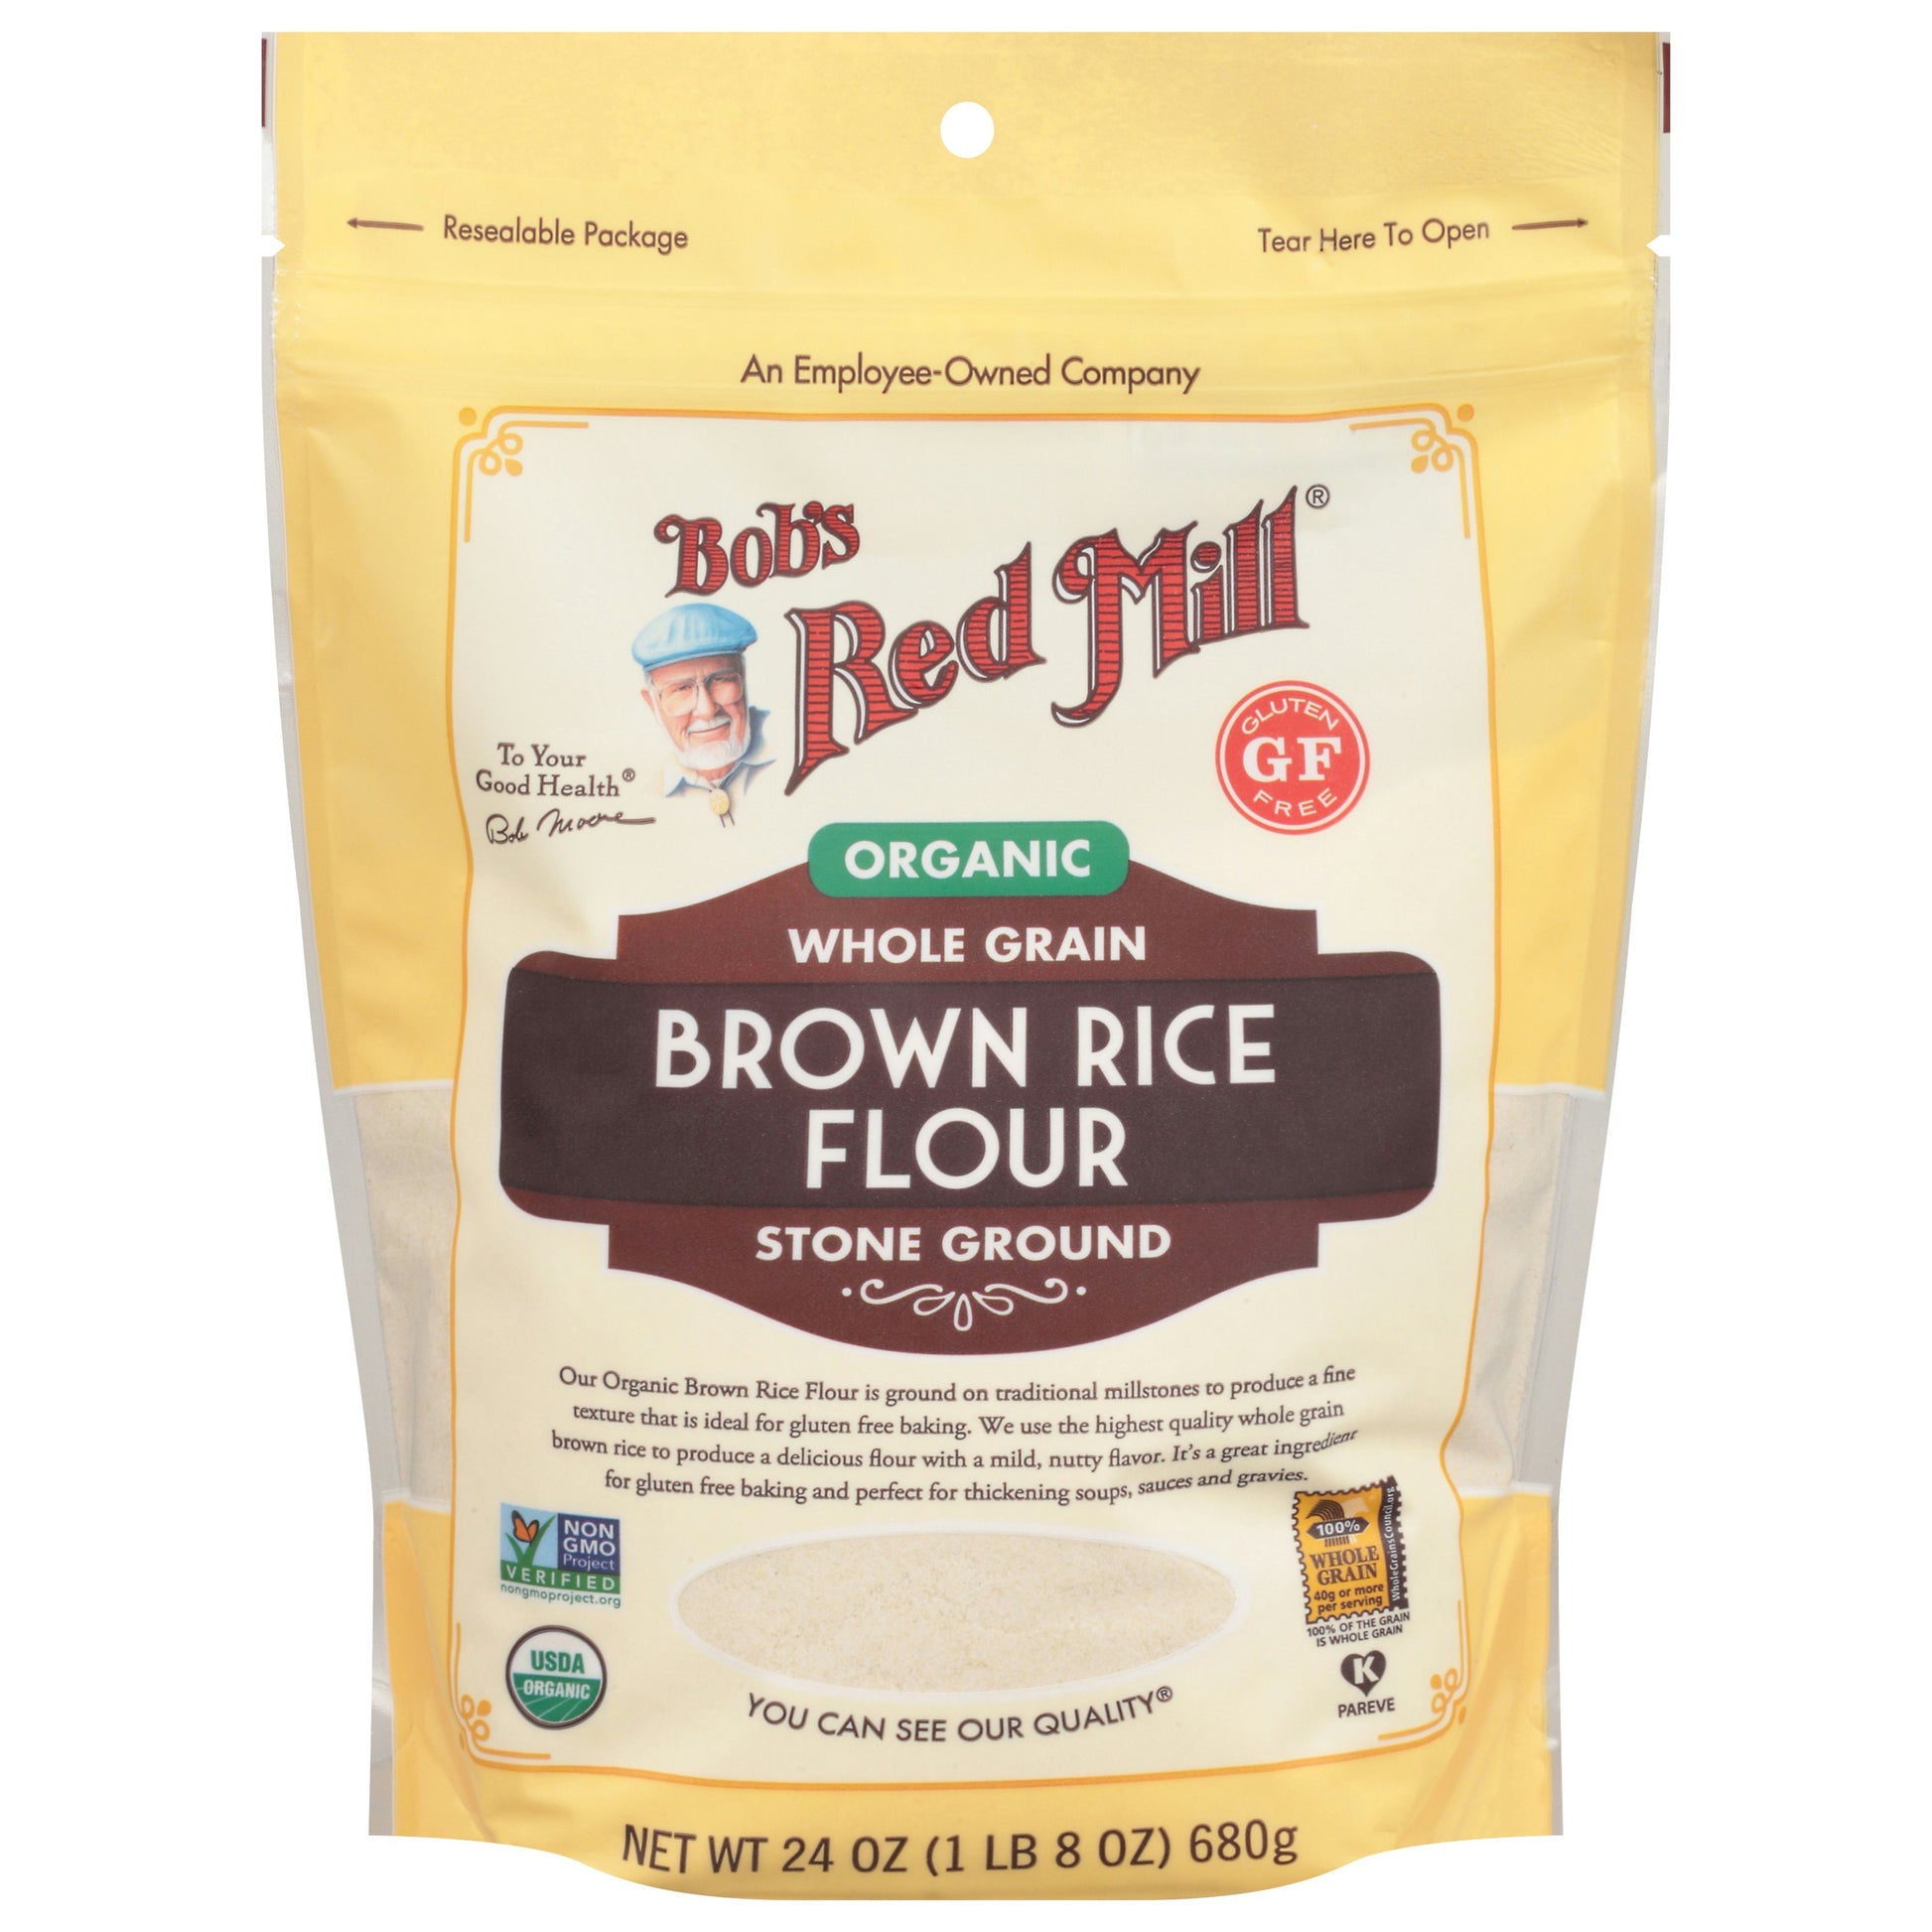 Bobs Red Mill Flour Rice Brown Org 24 oz (Pack of 4)